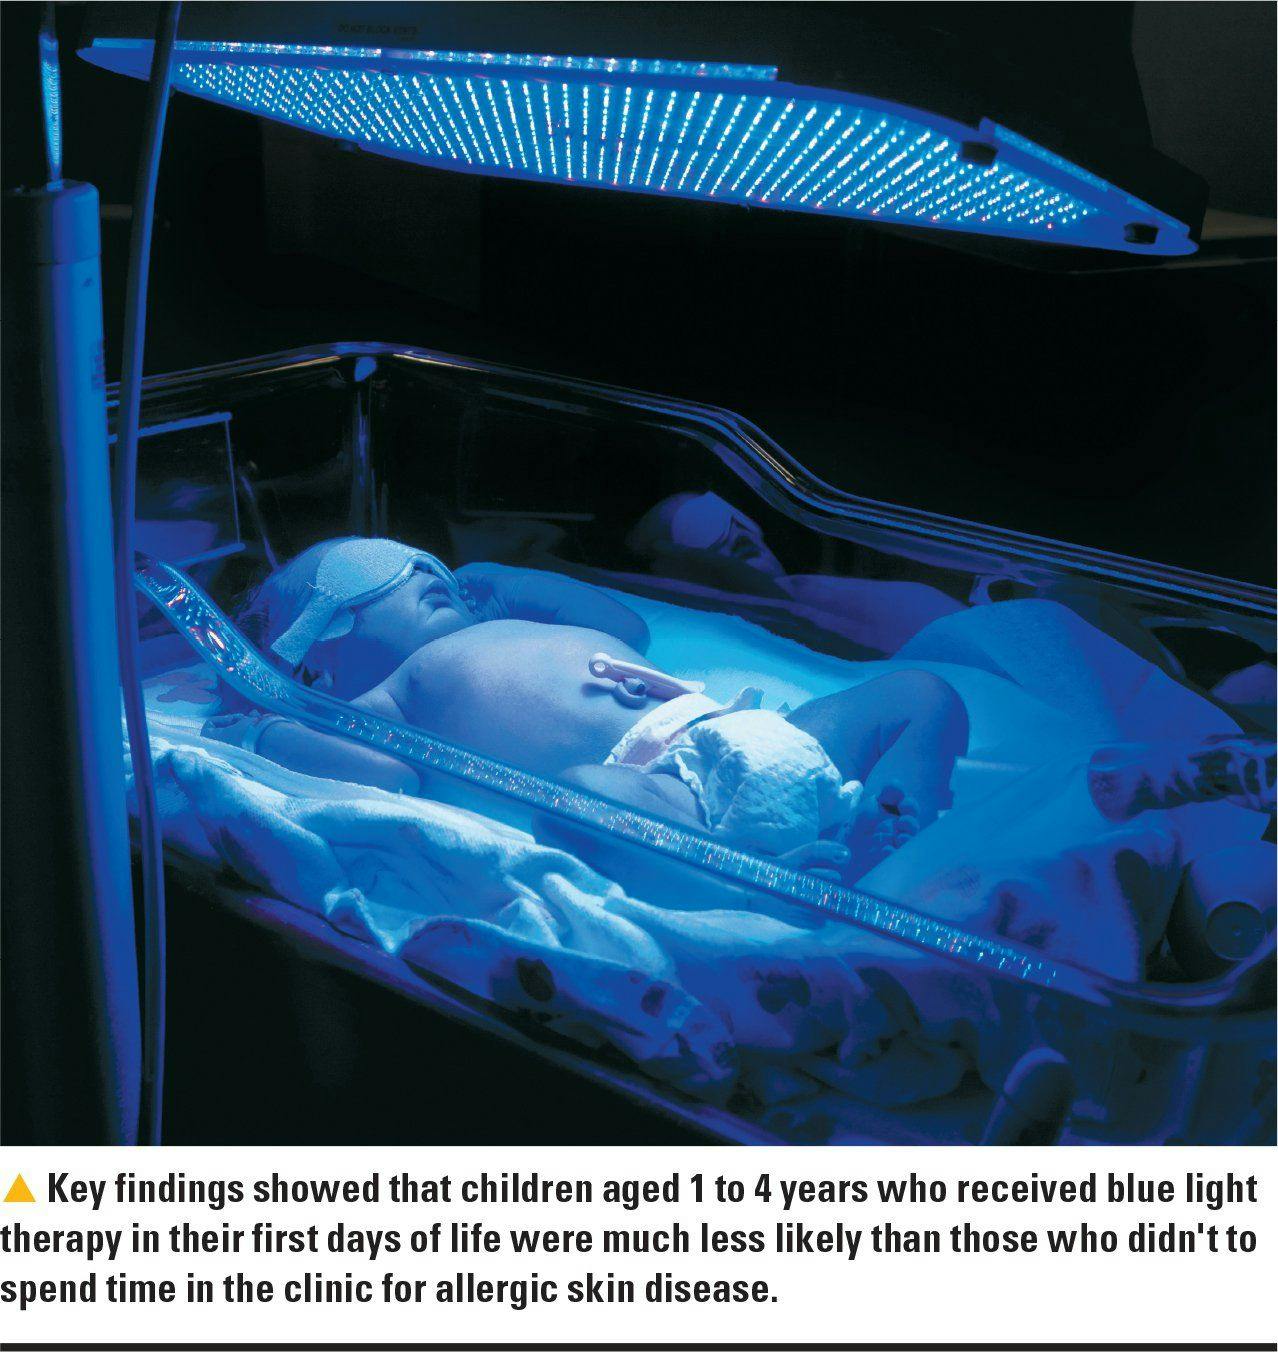 image of infant undergoing blue light therapy